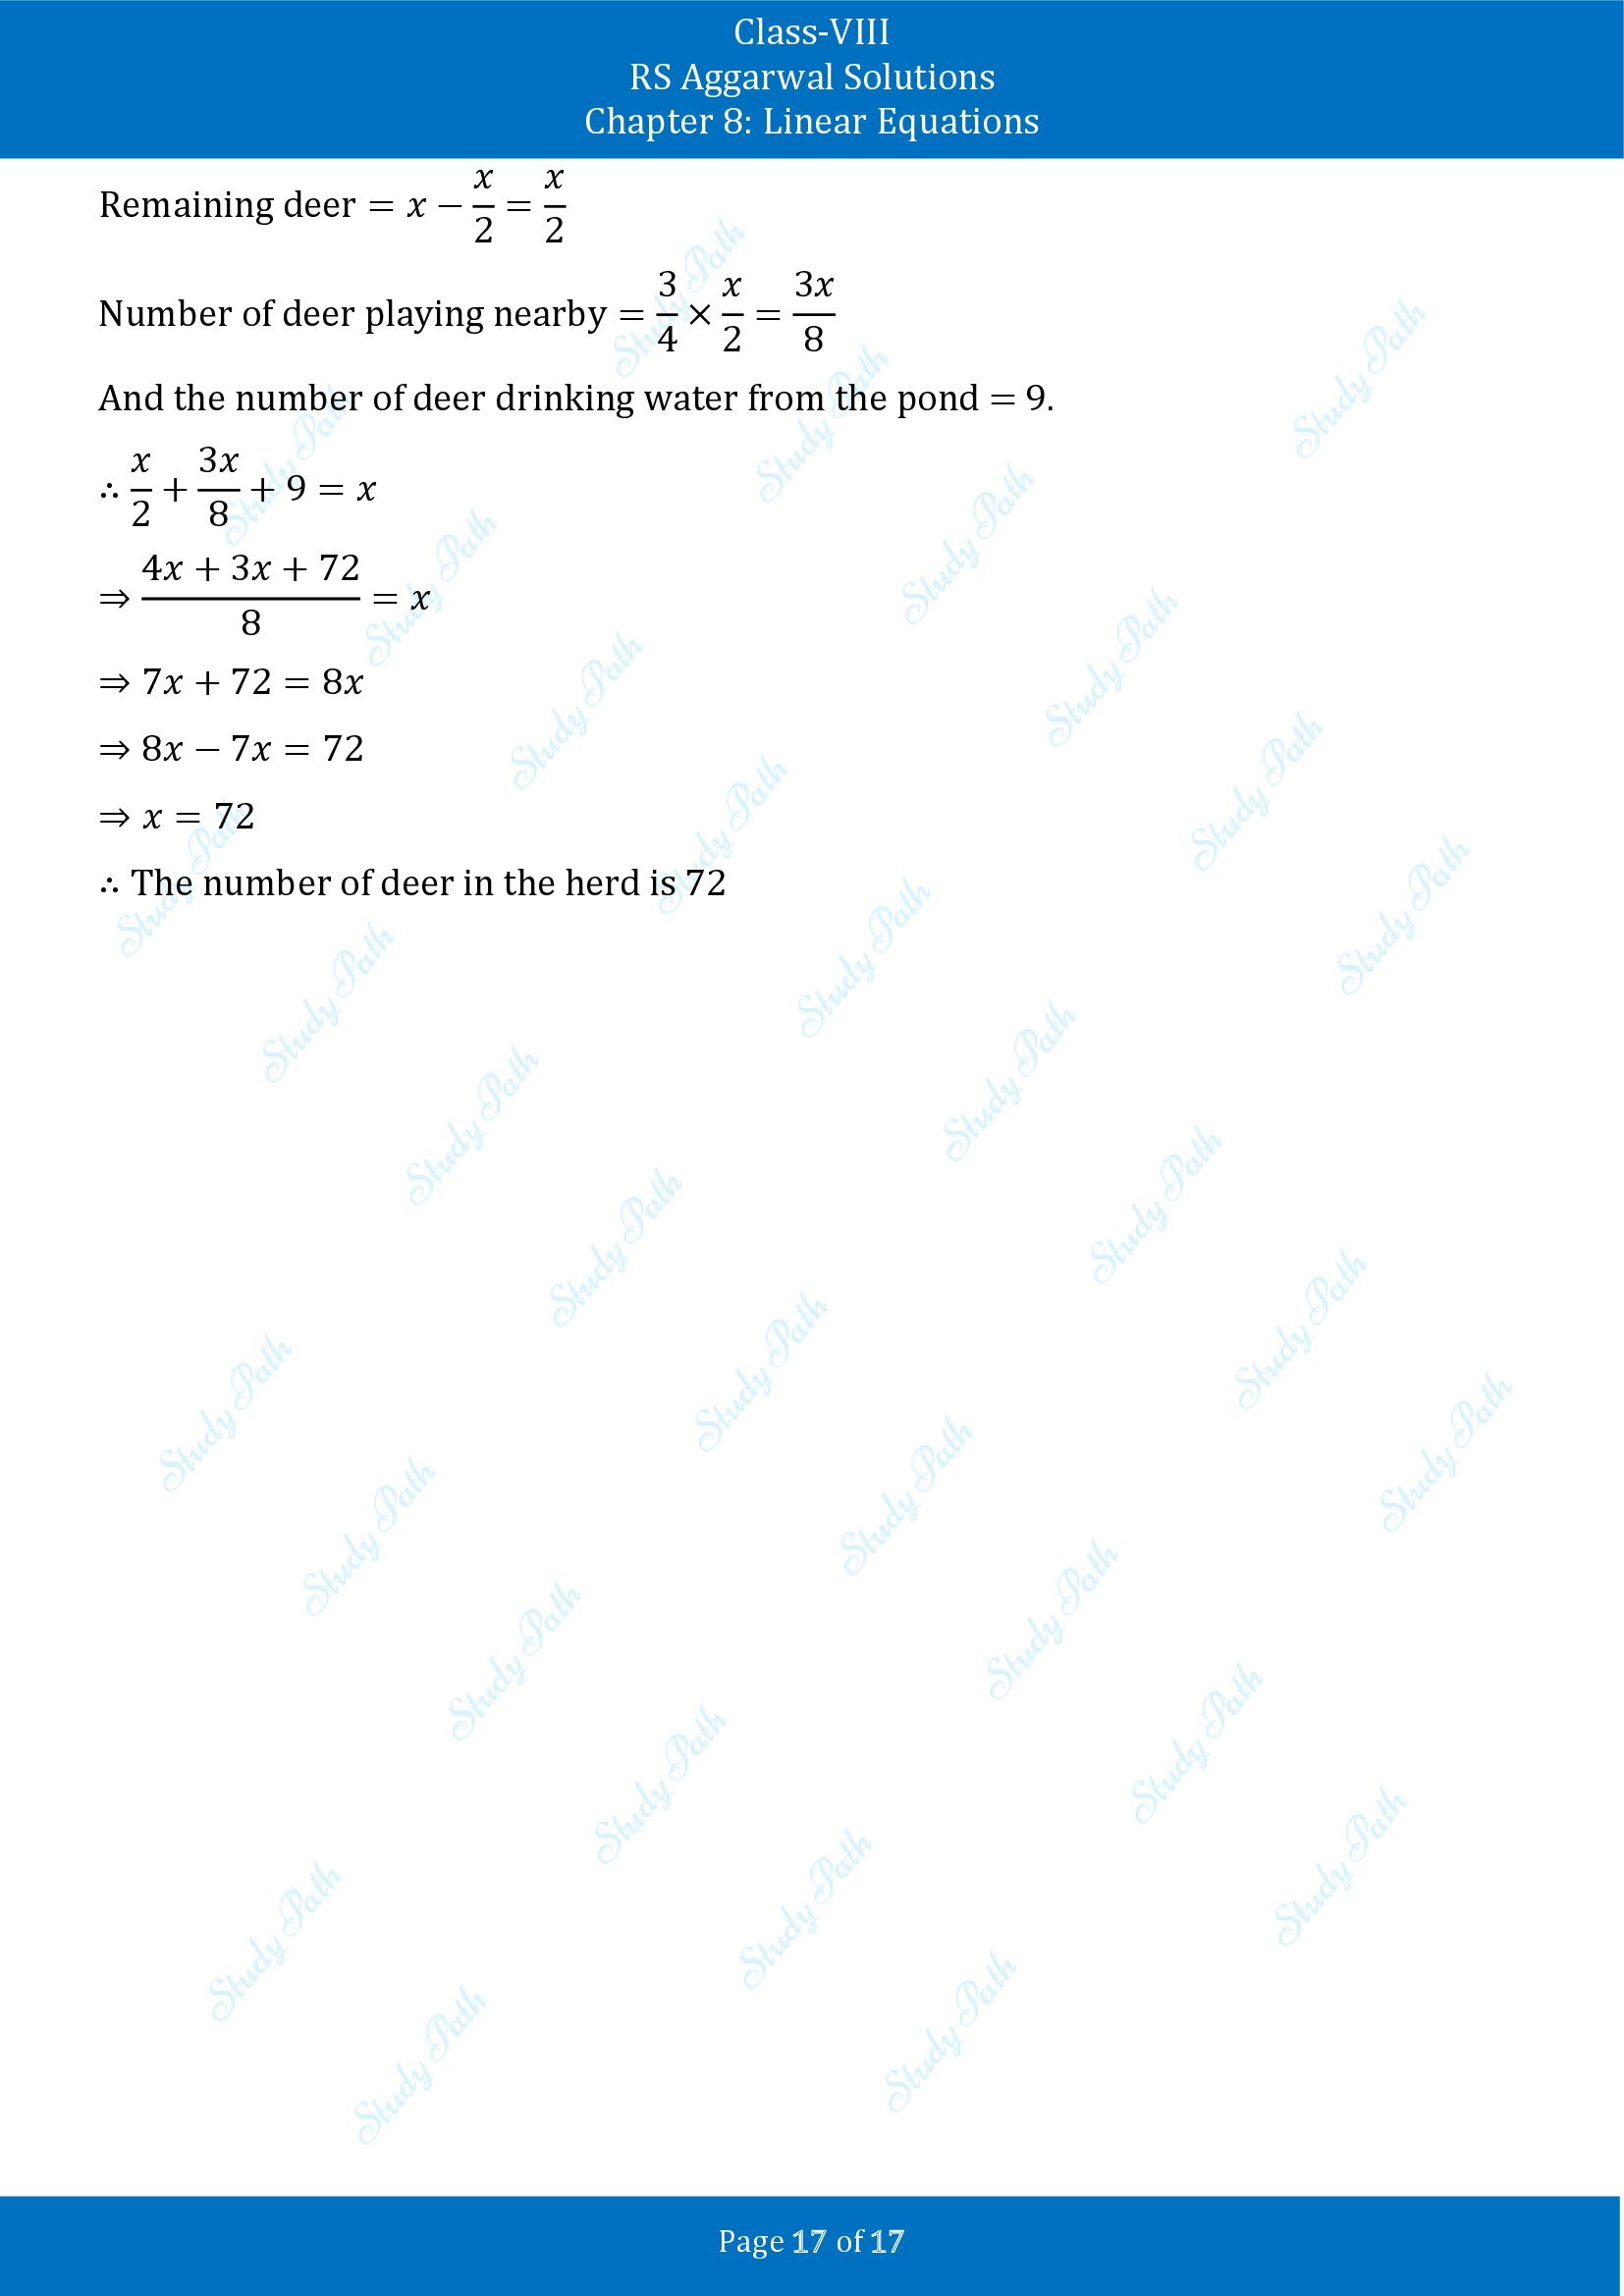 RS Aggarwal Solutions Class 8 Chapter 8 Linear Equations Exercise 8B 00017